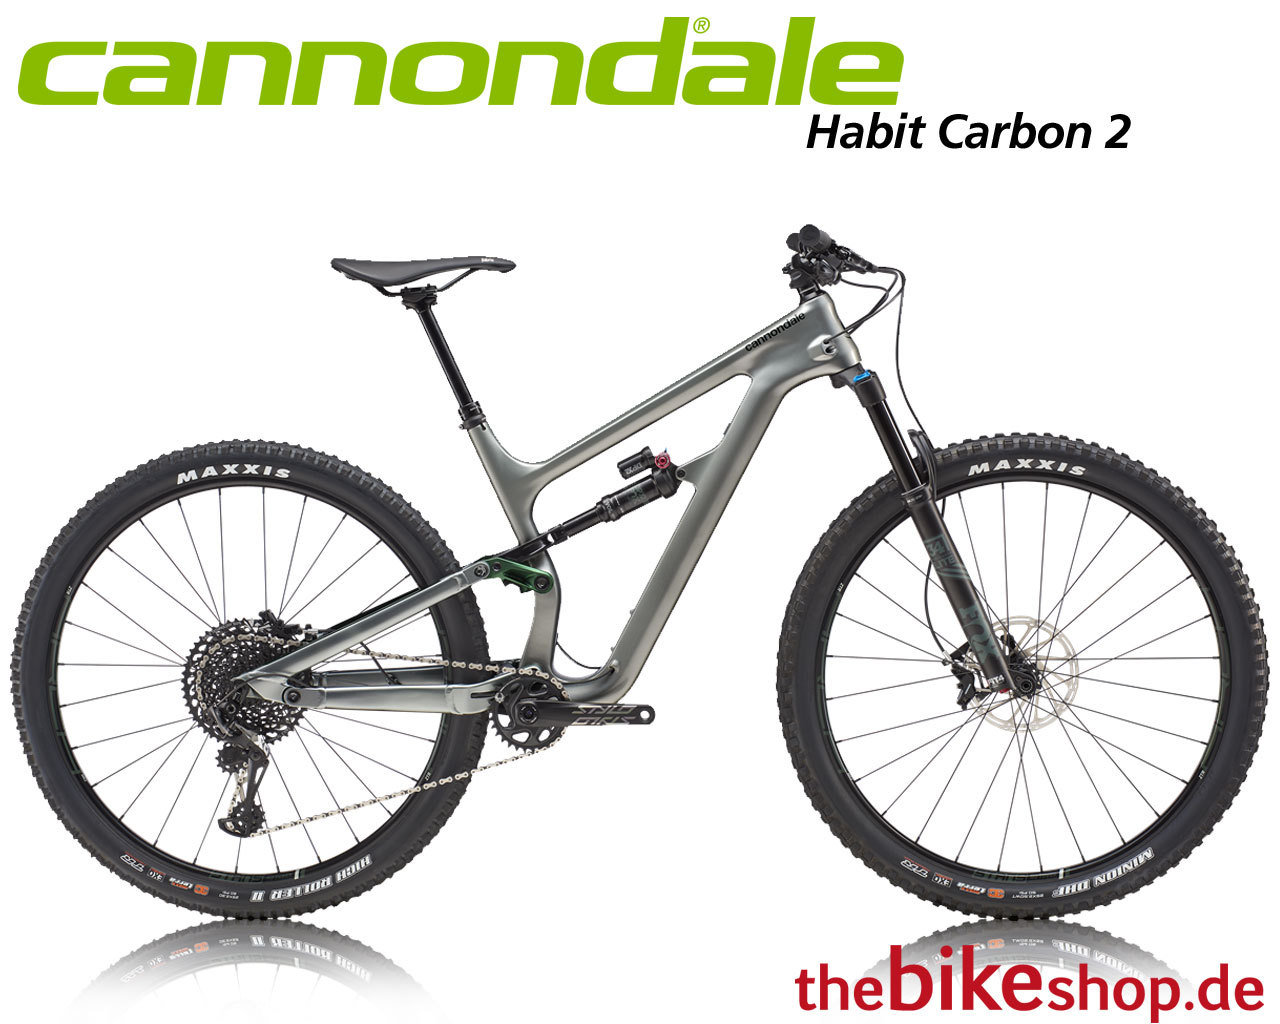 Cannondale Scalpel Si Carbon 4 2019 , HD Wallpaper & Backgrounds